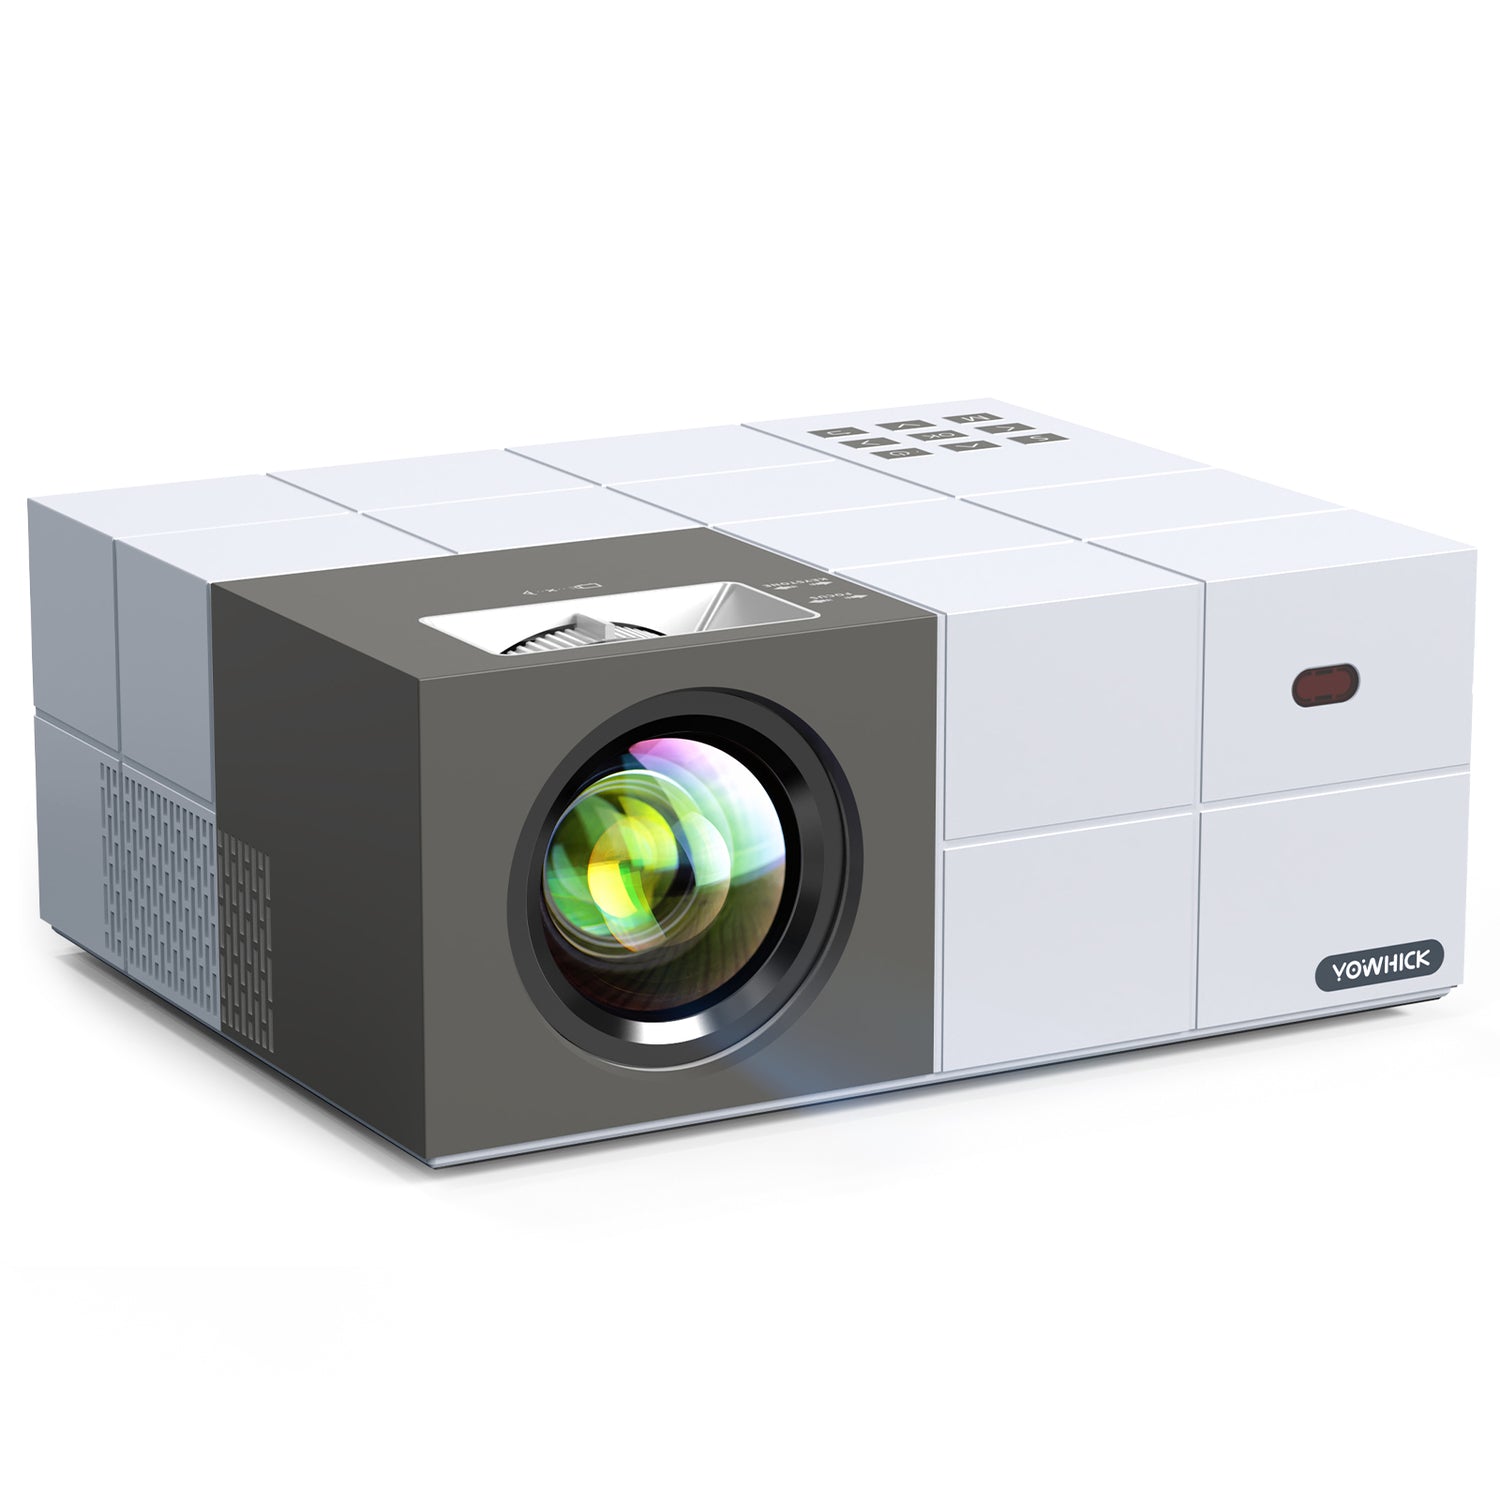 Native 1080P 5G WiFi Bluetooth Projector 4K Support, GDP1W Outdoor  Projector White